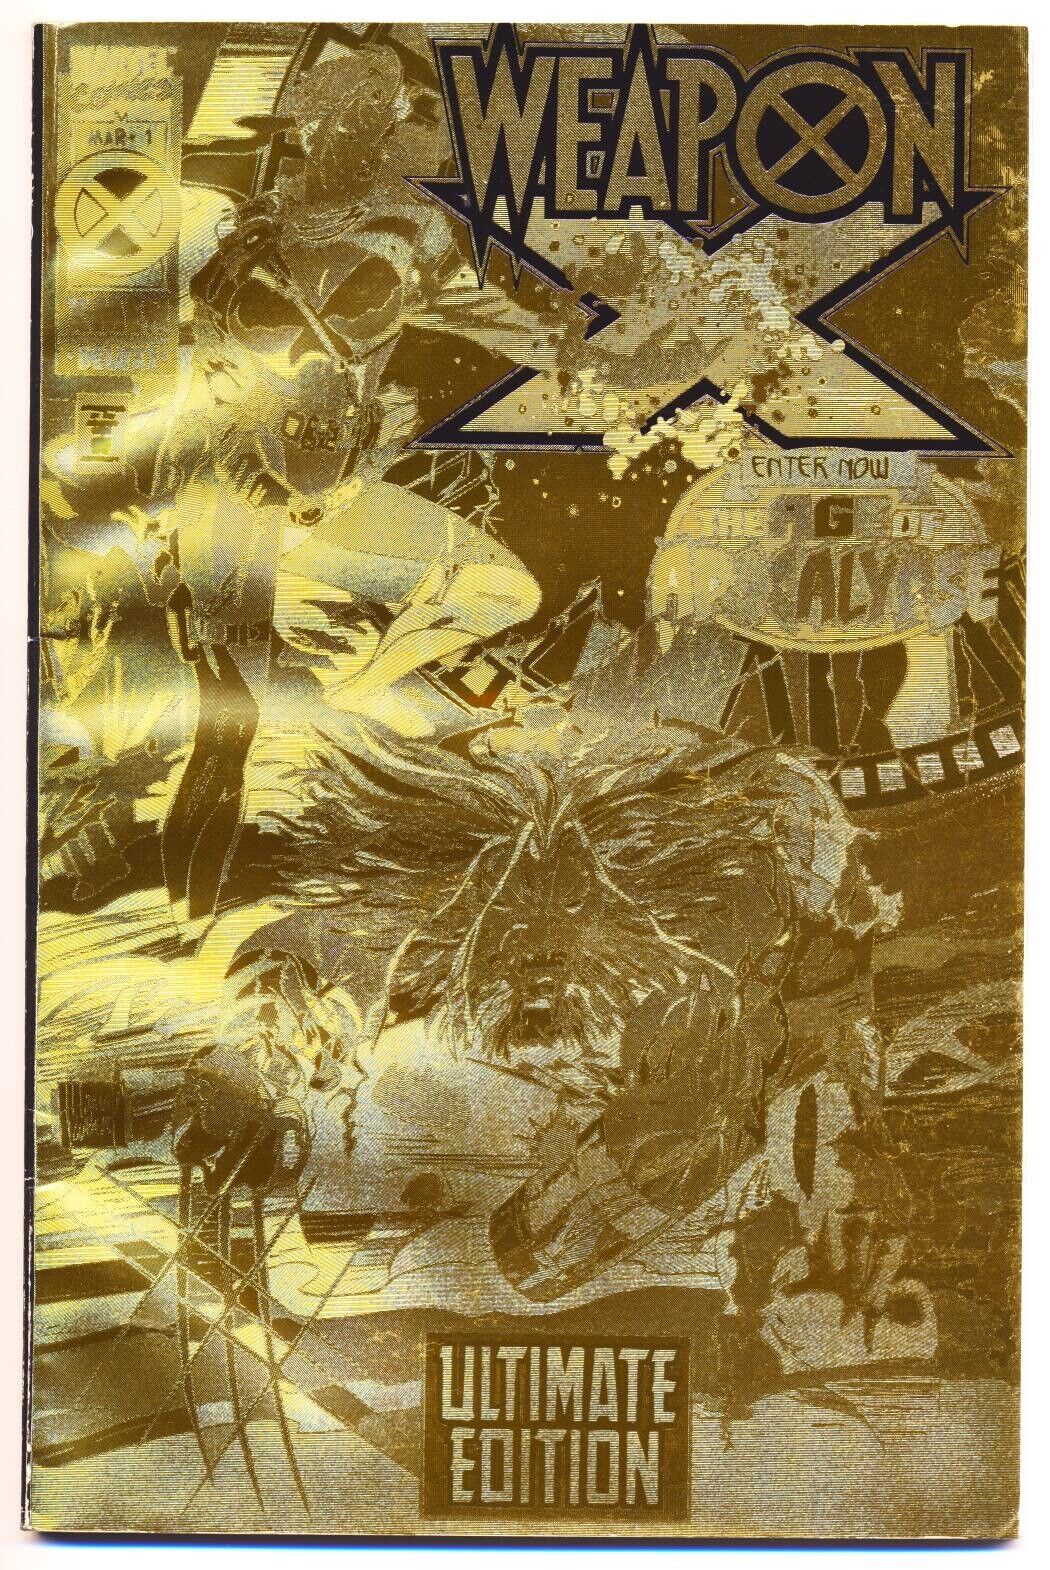 ULTIMATE WEAPON X TPB VG, Gold Foil, Marvel Comics 1995 Stock Image